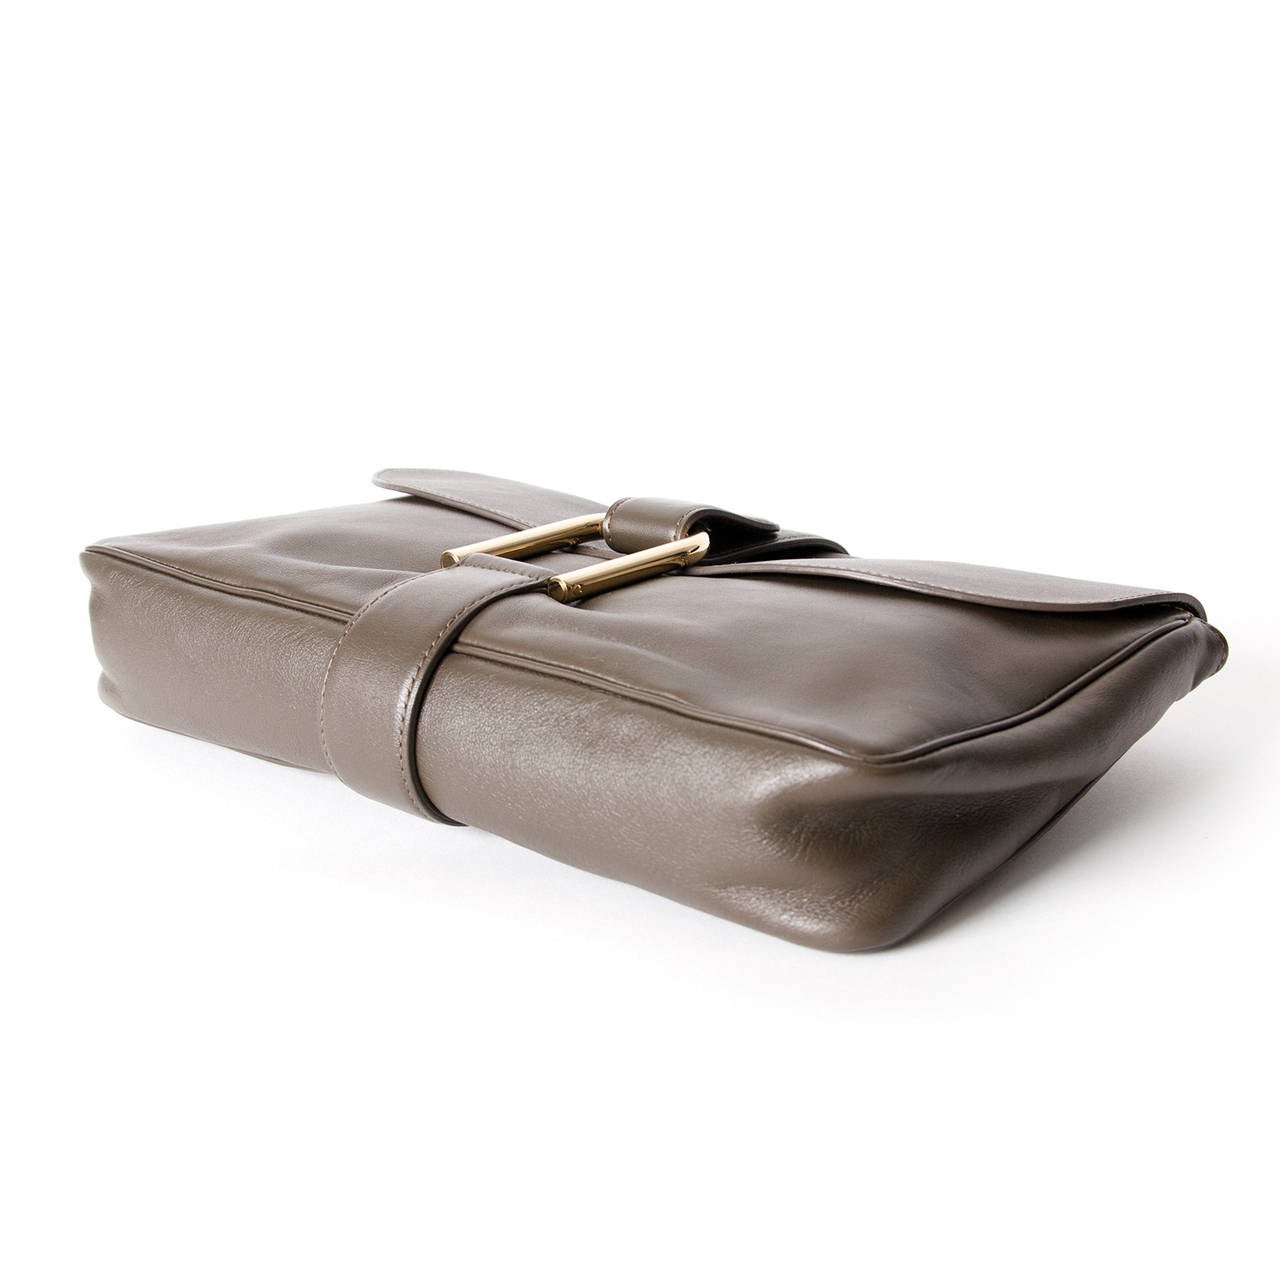 Delvaux Clutch Taupe

The perfect bag for a special occasion.

Goldtone buckle and magnetic closure on the front.

The interior features one compartment with a smaller pocket. 

Comes with pocket mirror.